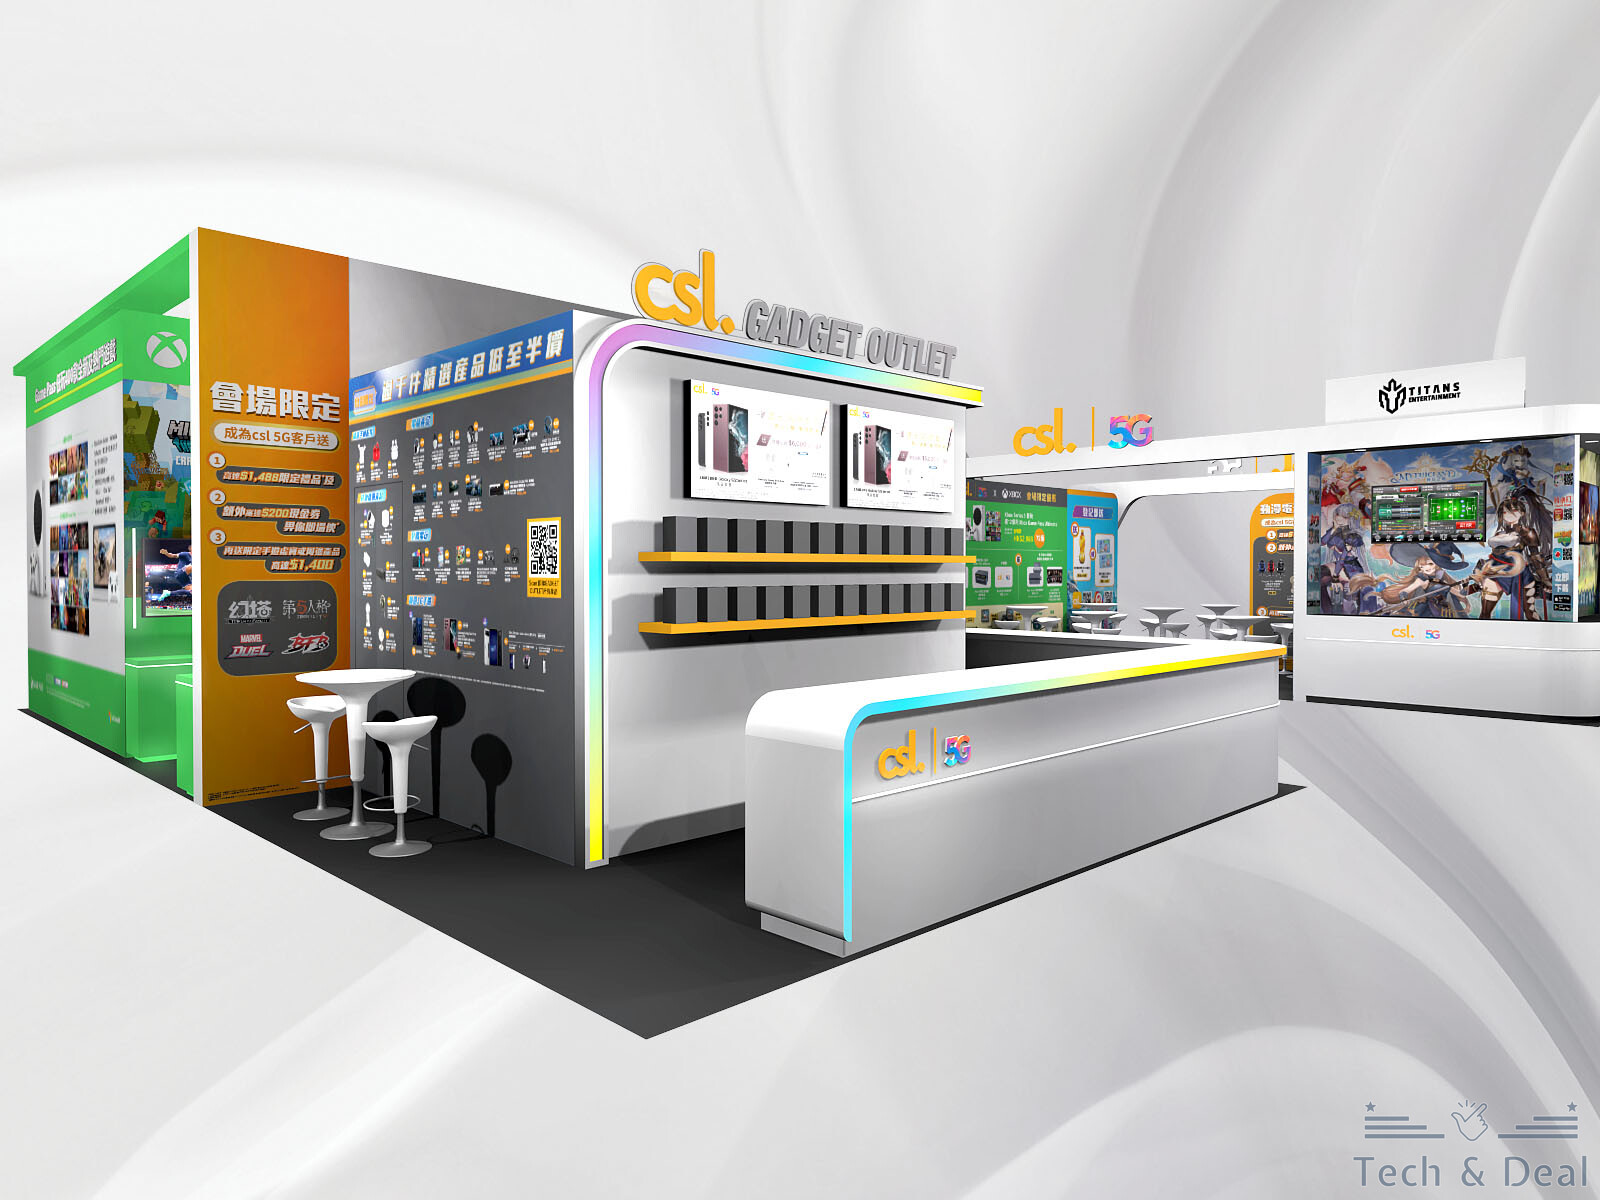 20220728p6 csl 5g games booth at acg2022